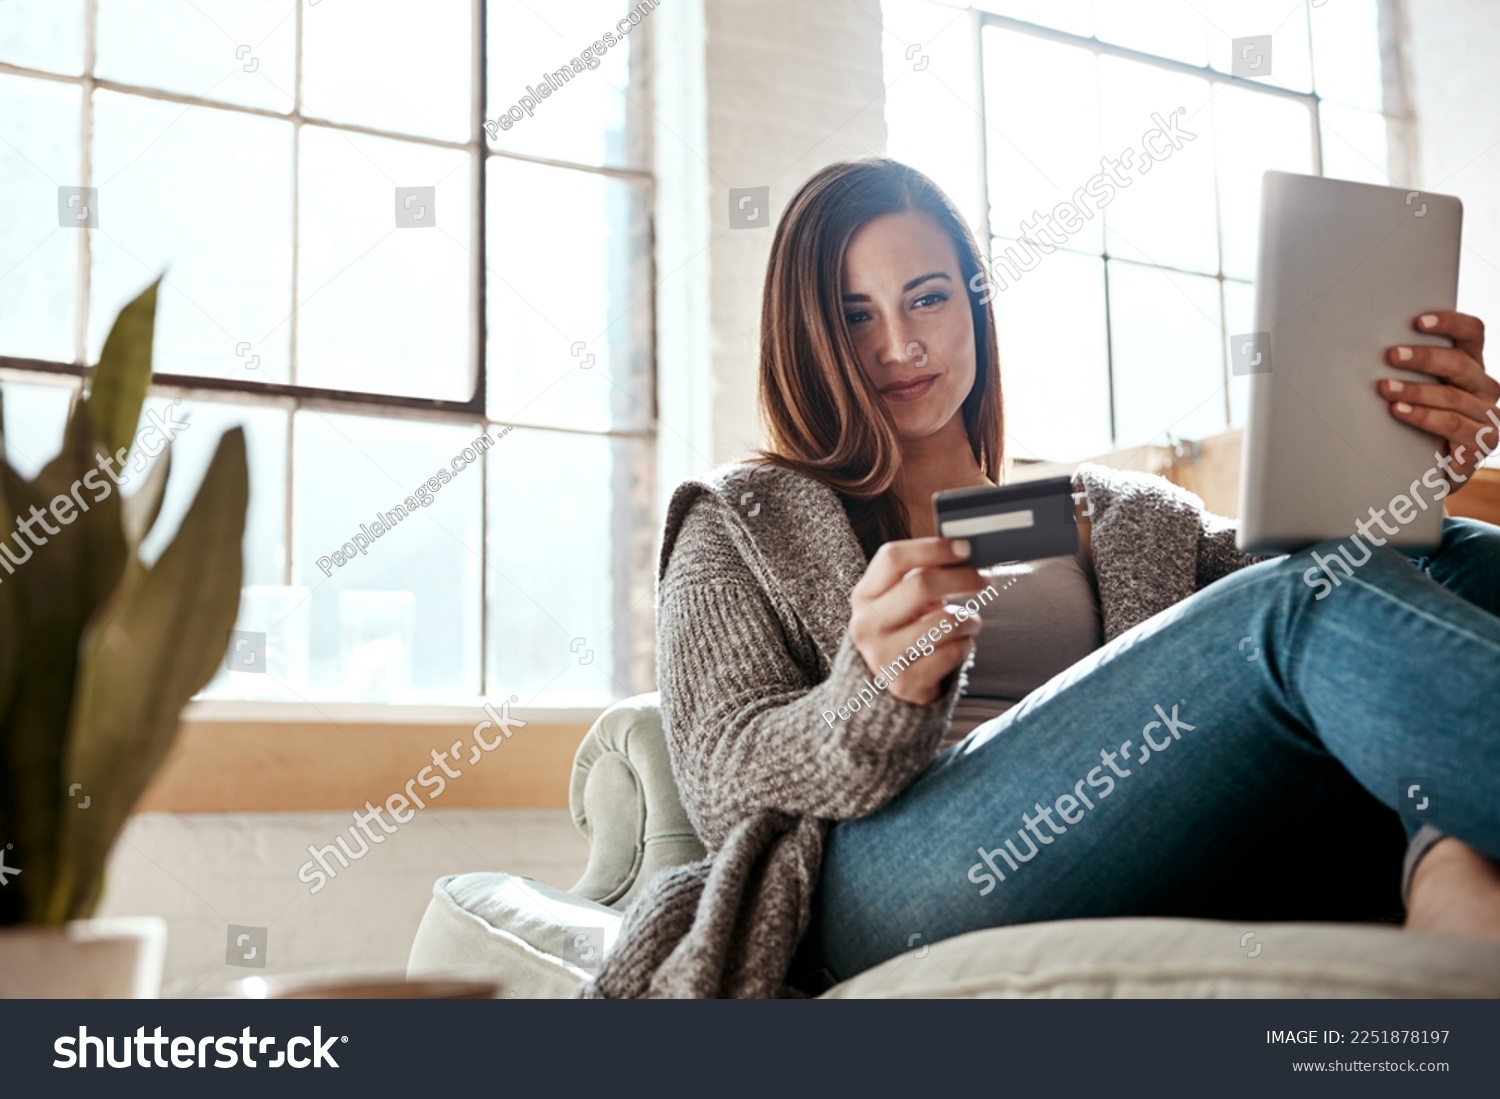 Digital tablet, credit card and woman on a sofa for online shopping, ecommerce and payment while relaxing. Girl, couch and online banking from app, purchase and booking online in a living room #2251878197